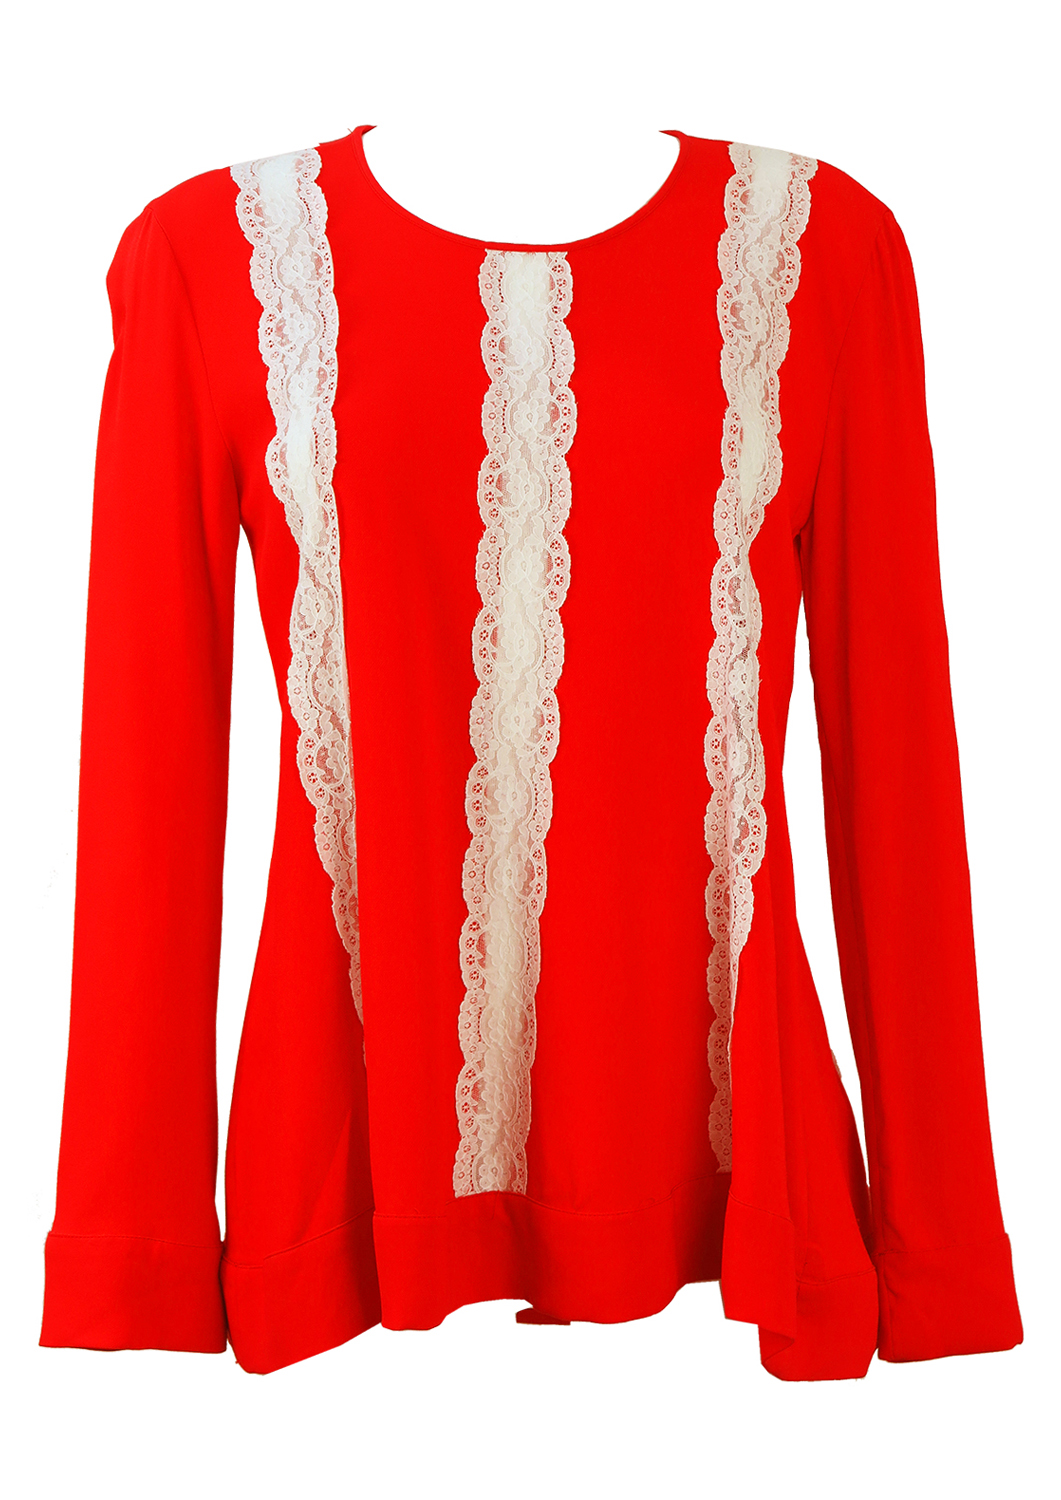 Red Long Sleeved Top with Striped White Lace Detail - M | Reign Vintage